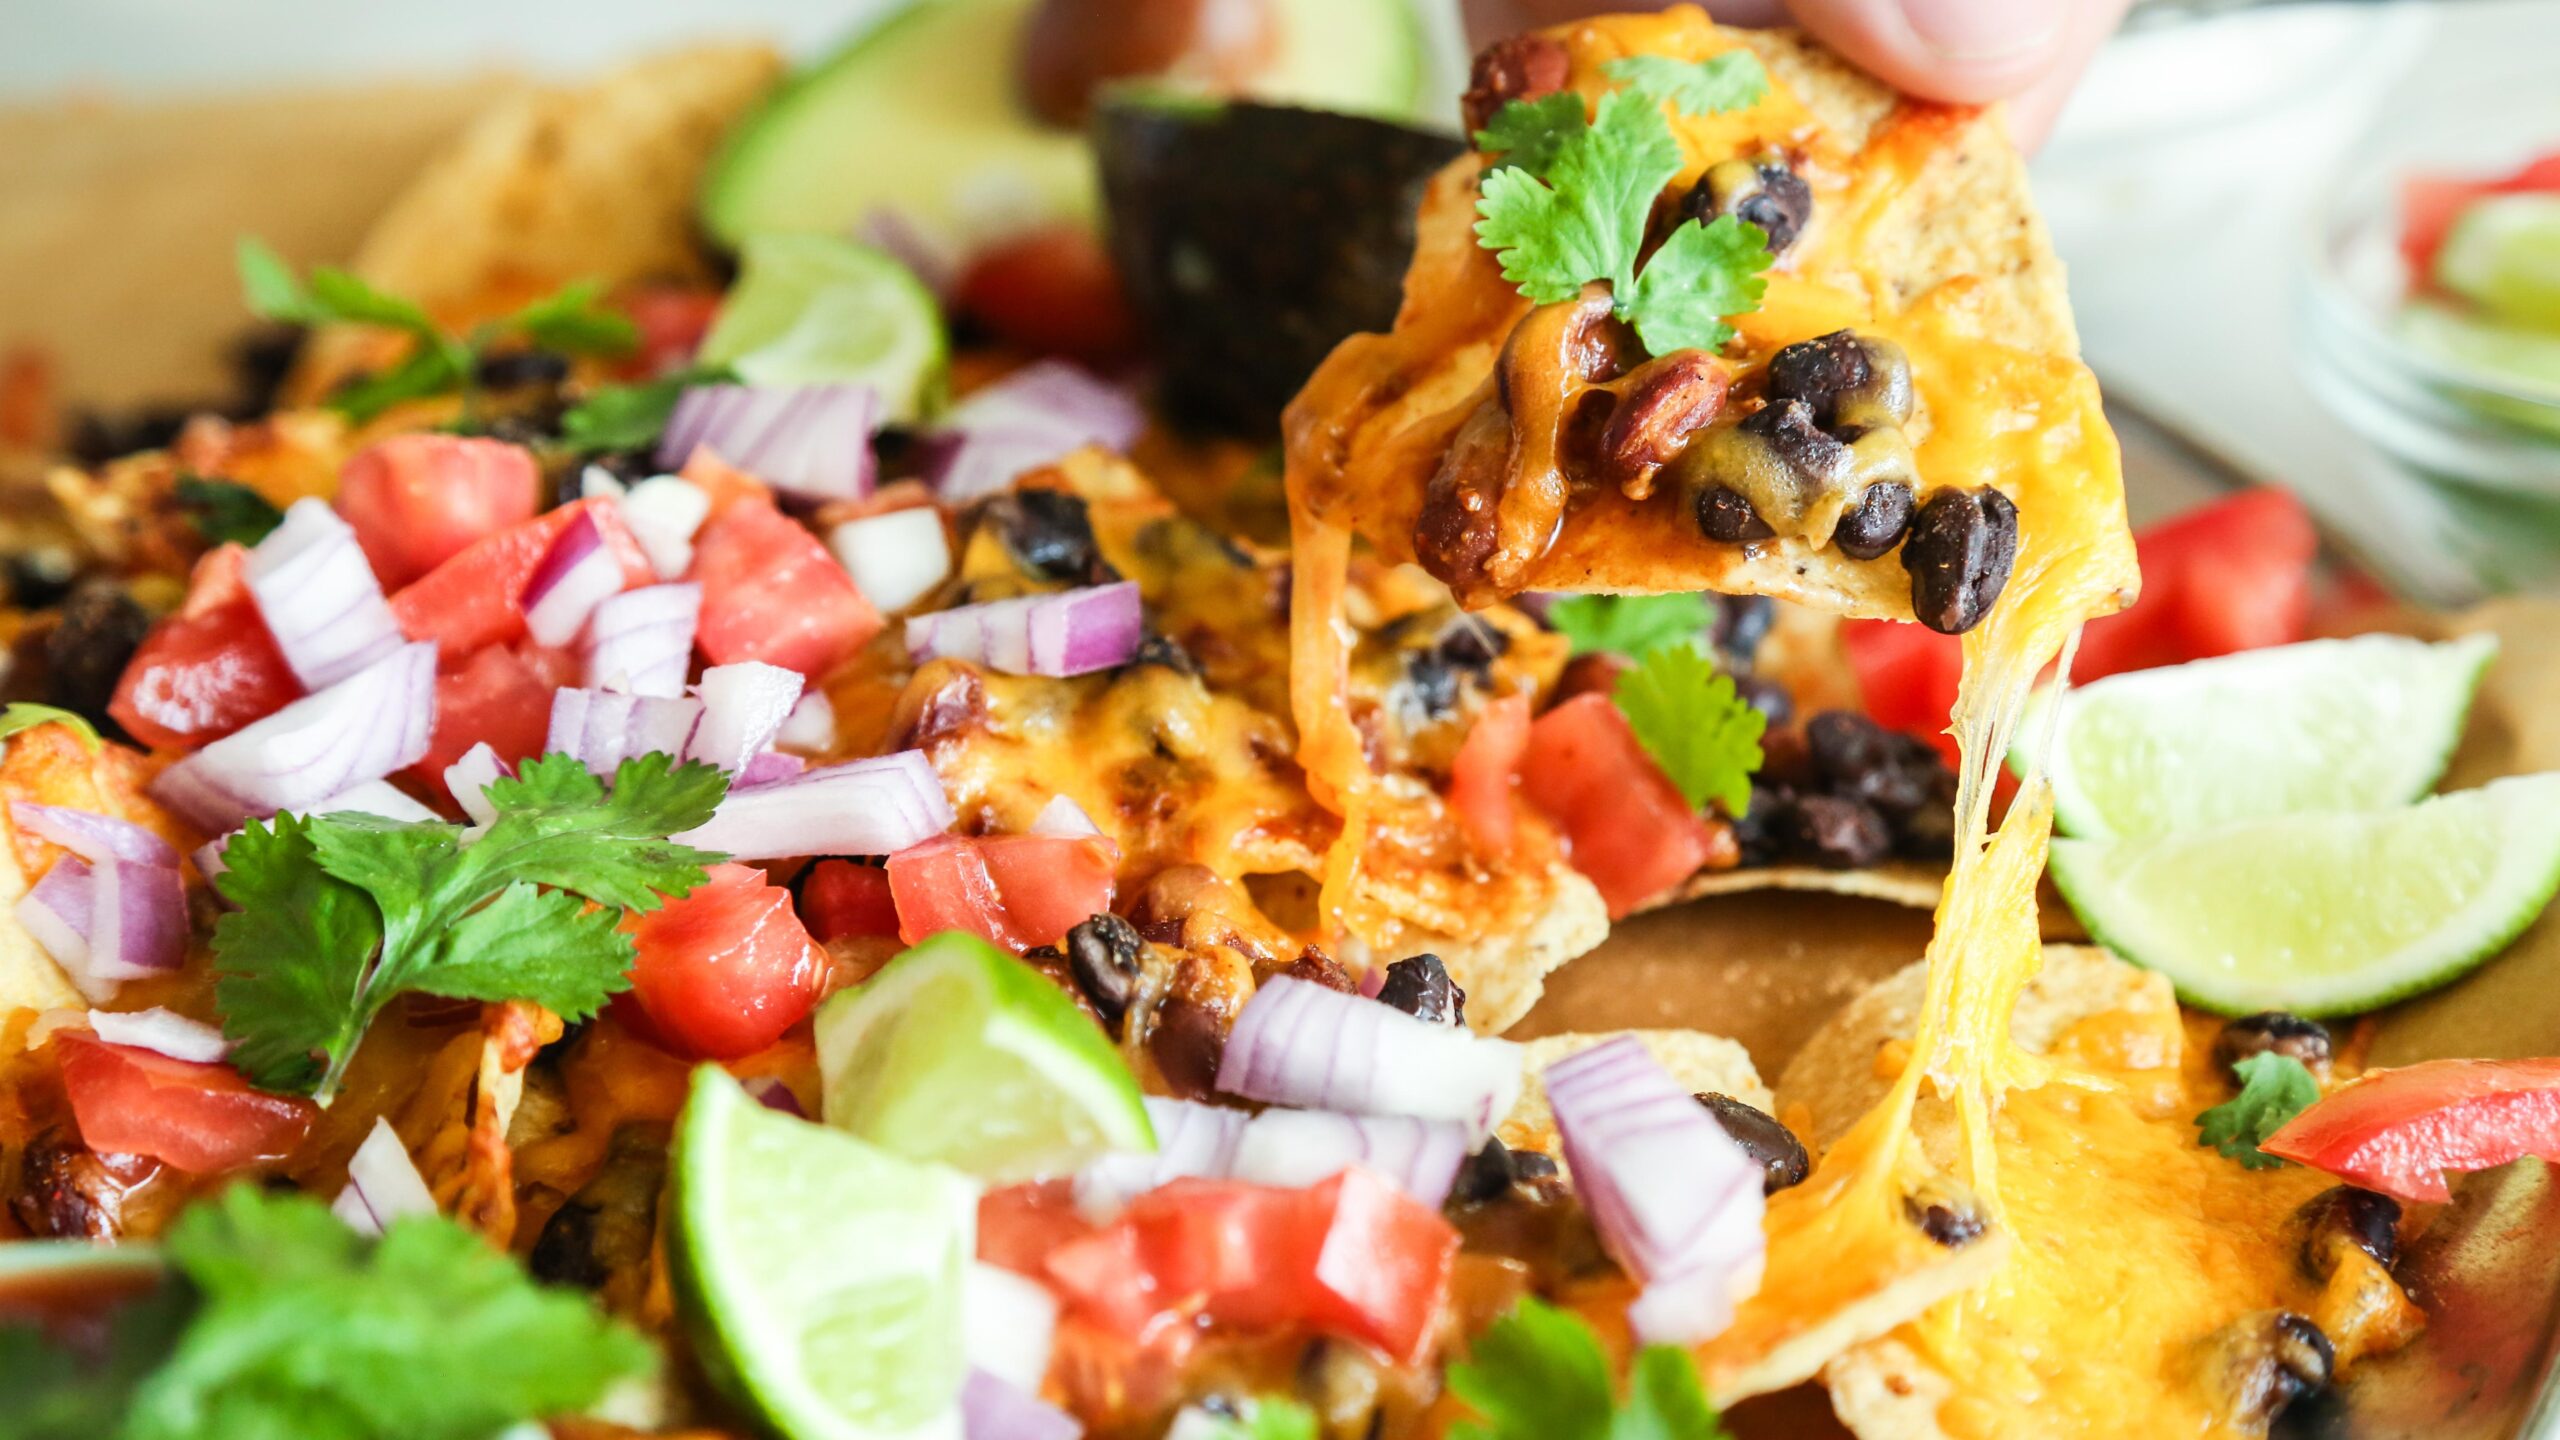  Perfectly crunchy chips, smothered in melted vegan cheese and topped with hearty black beans